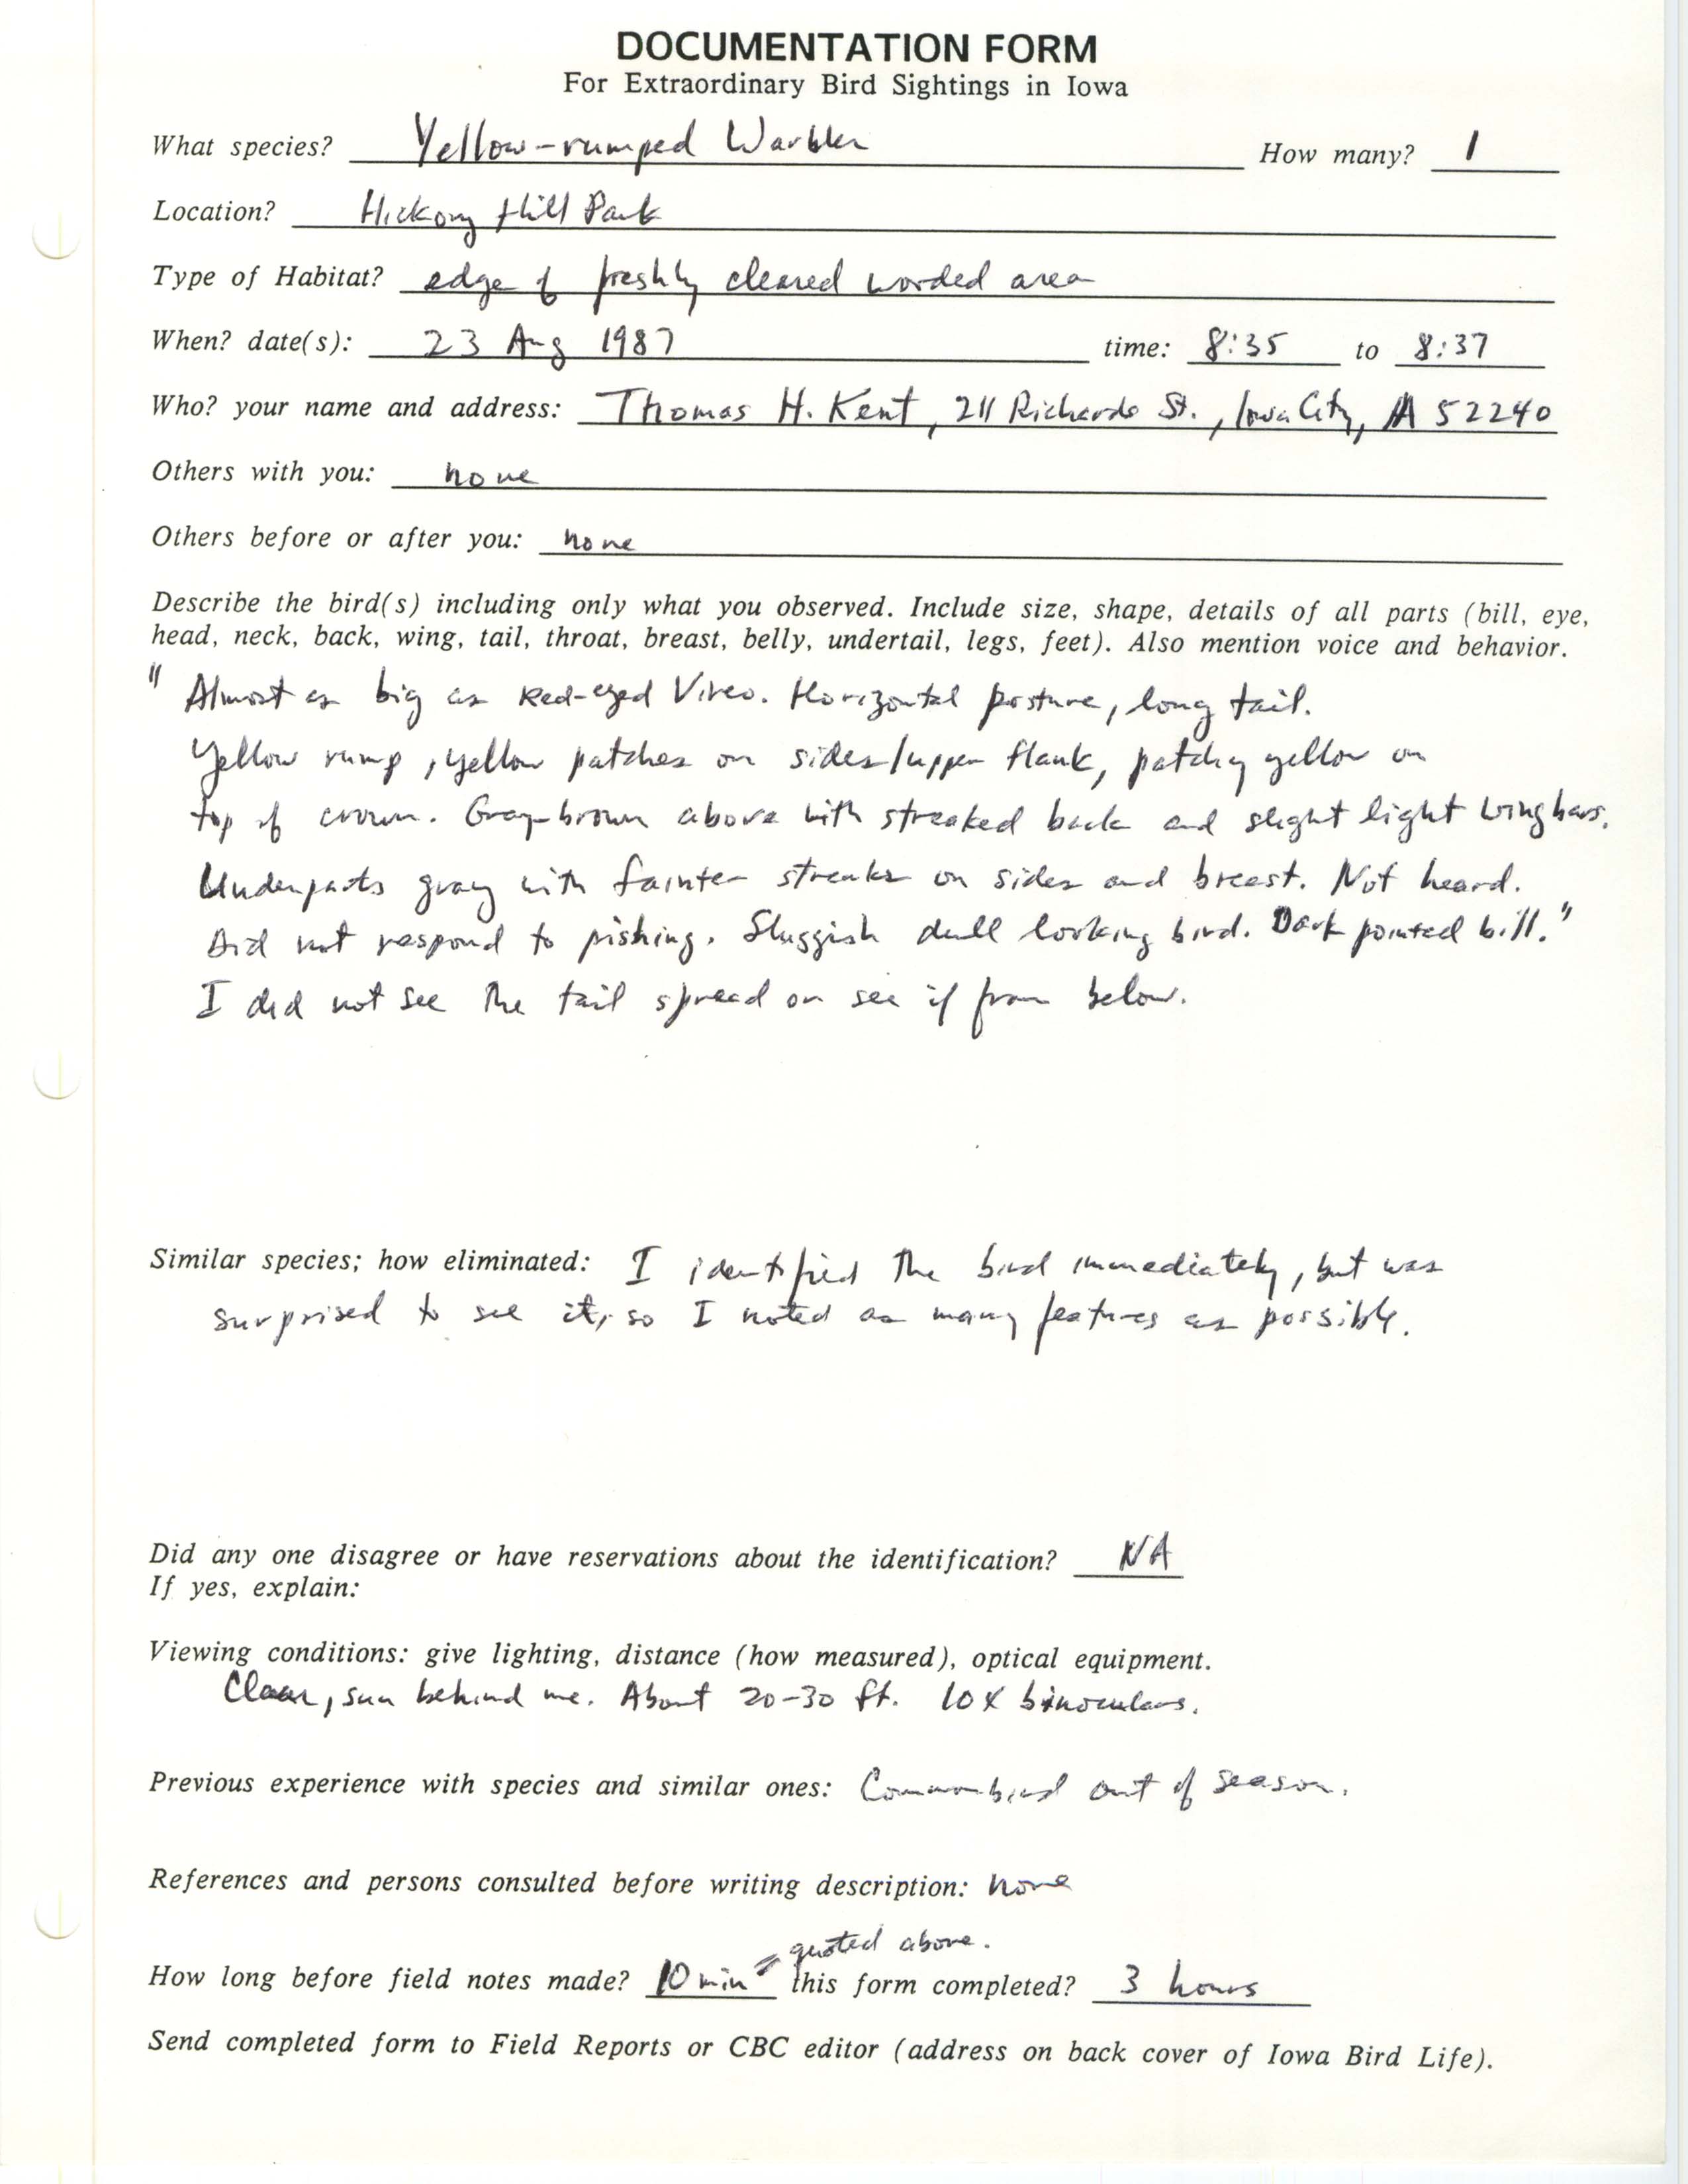 Rare bird documentation form for Yellow-rumped Warbler at Hickory Hill Park, 1987